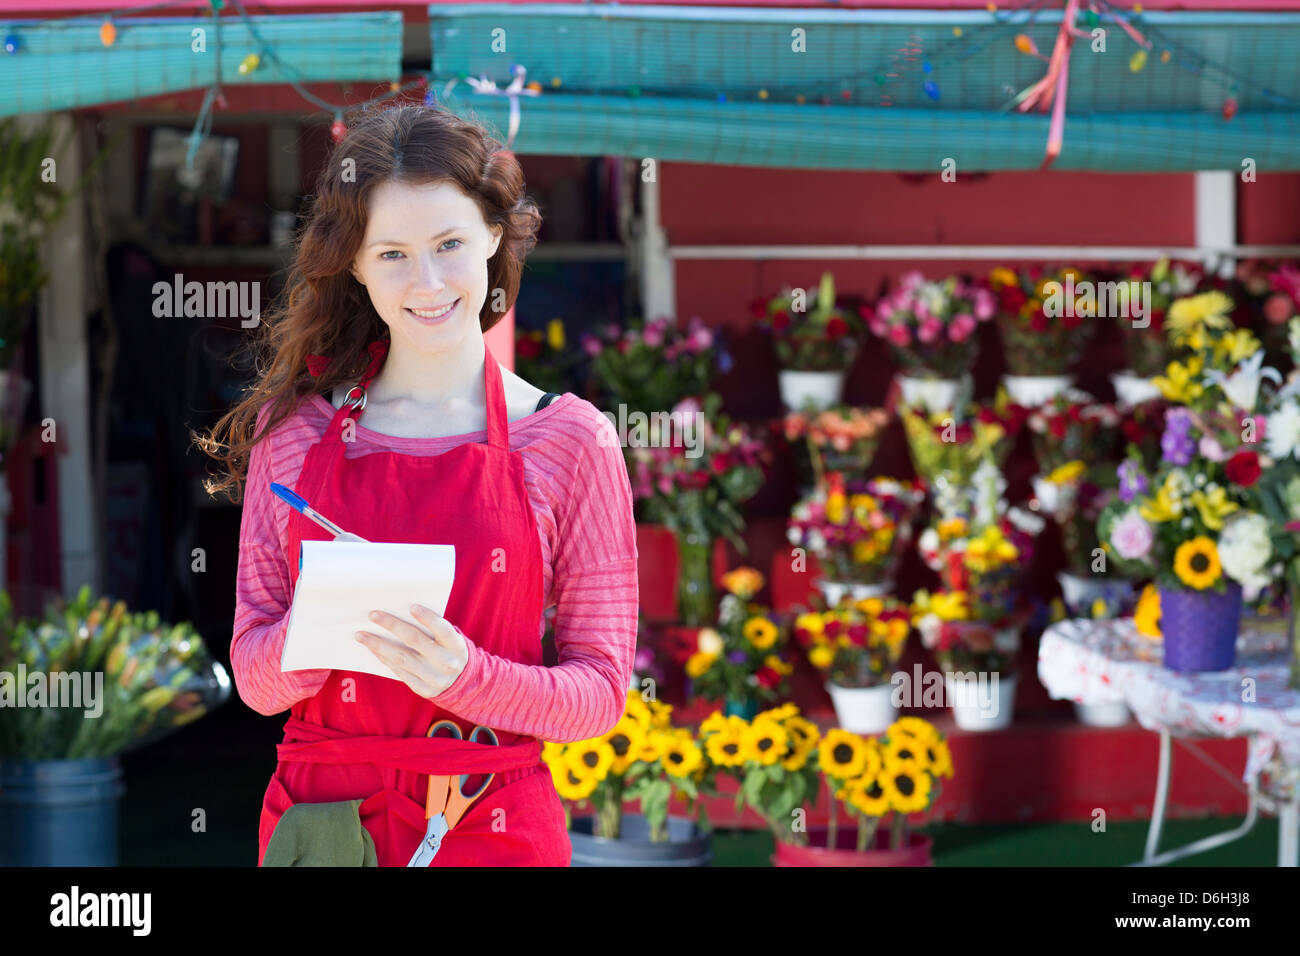 Florist making notes in shop Stock Photo